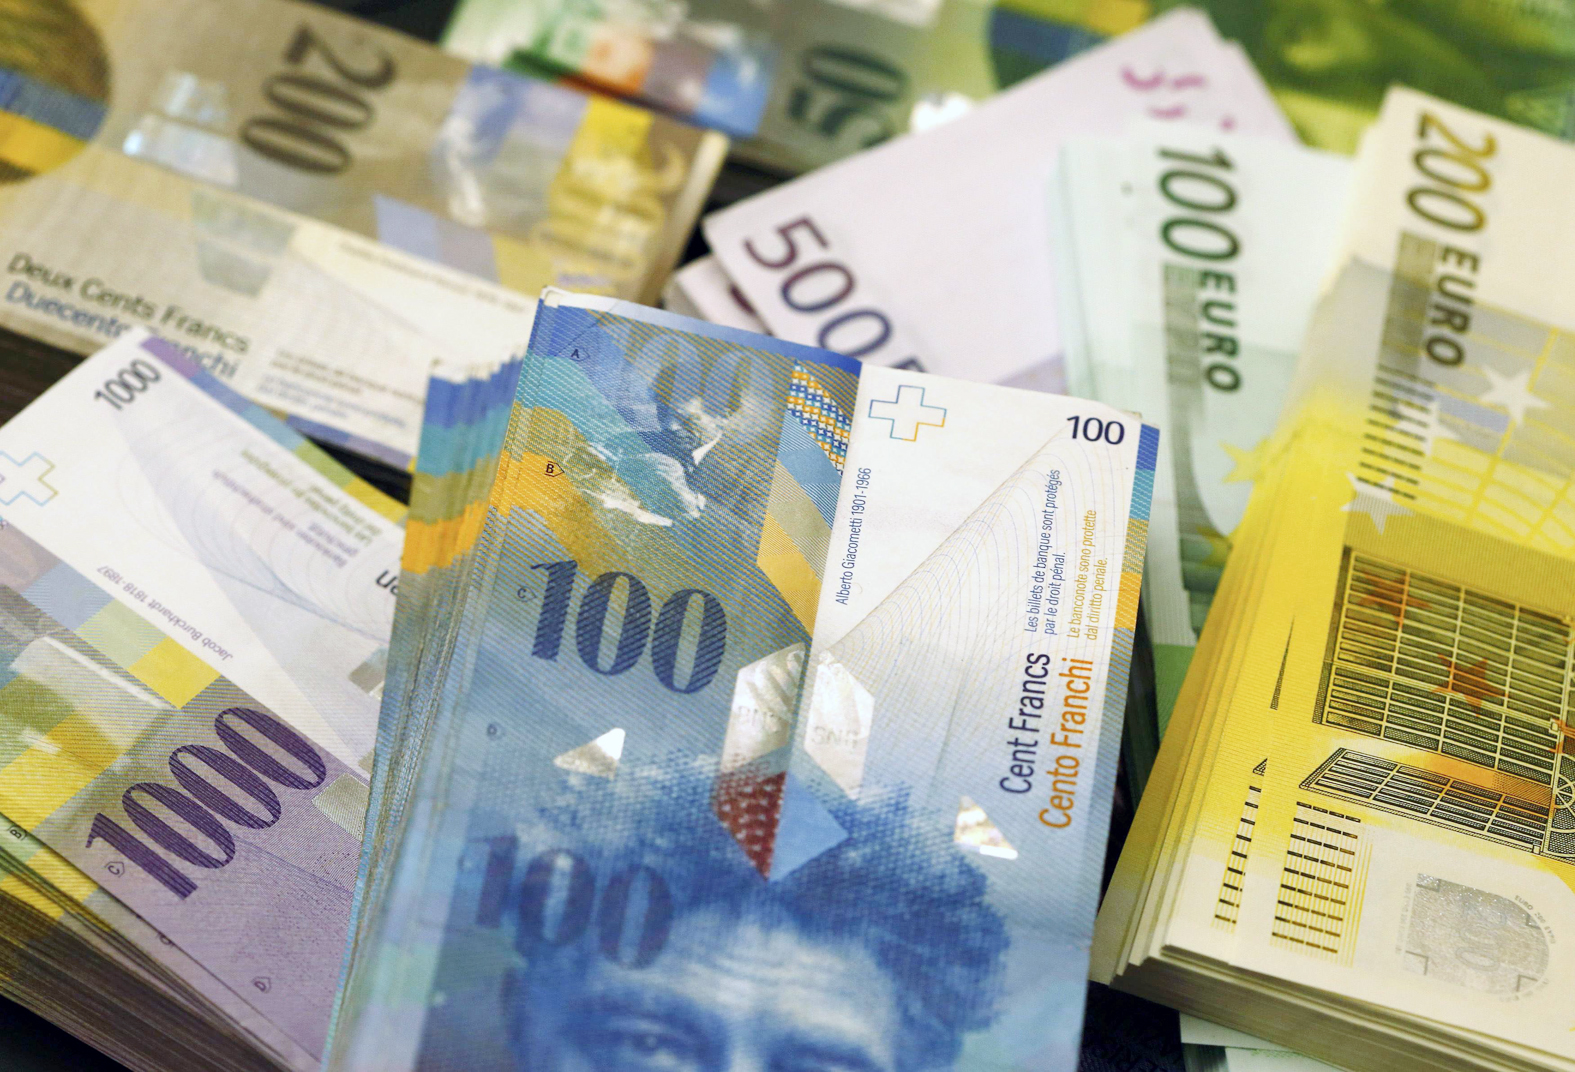 File photo shows Swiss Franc and Euro banknotes of several values in Swiss bank in Bern